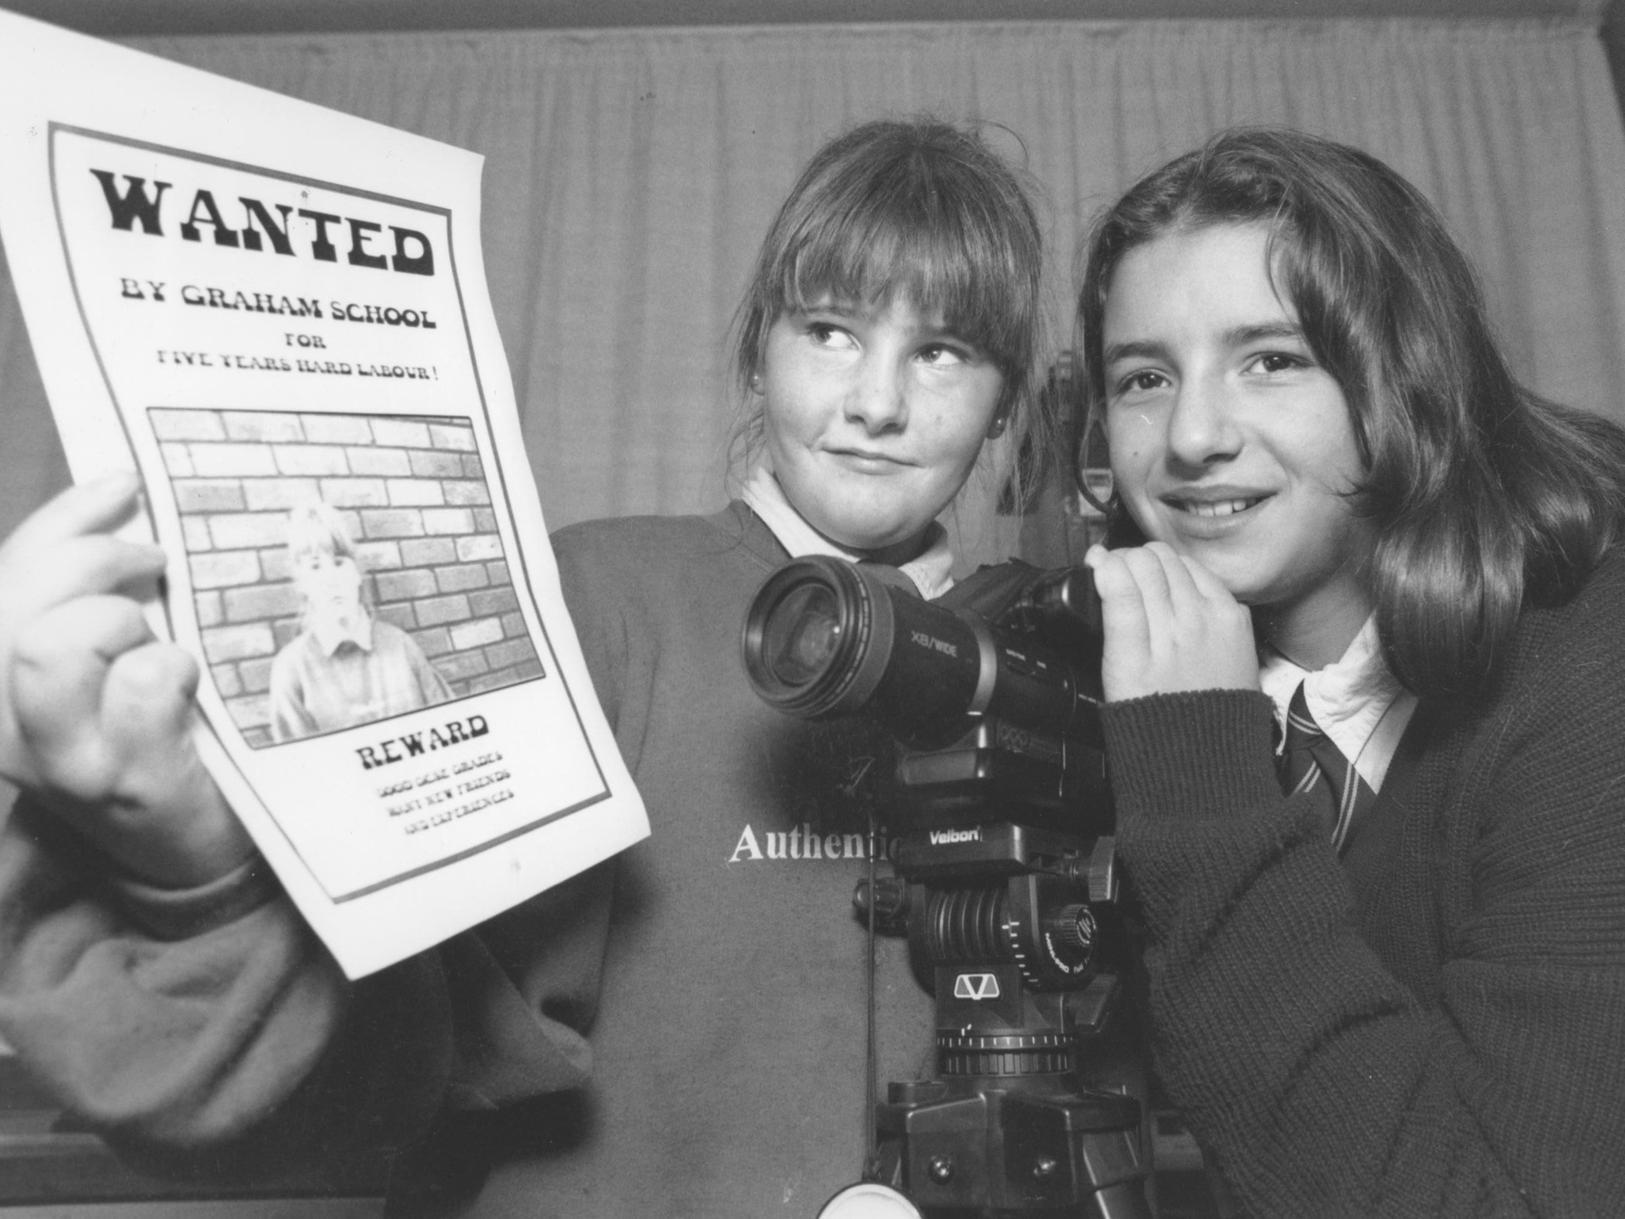 At a Graham School opening evening in November 1995 Felicity Power, left, found herself on a wanted poster with a little help from video camera operator Jessica Holmes.